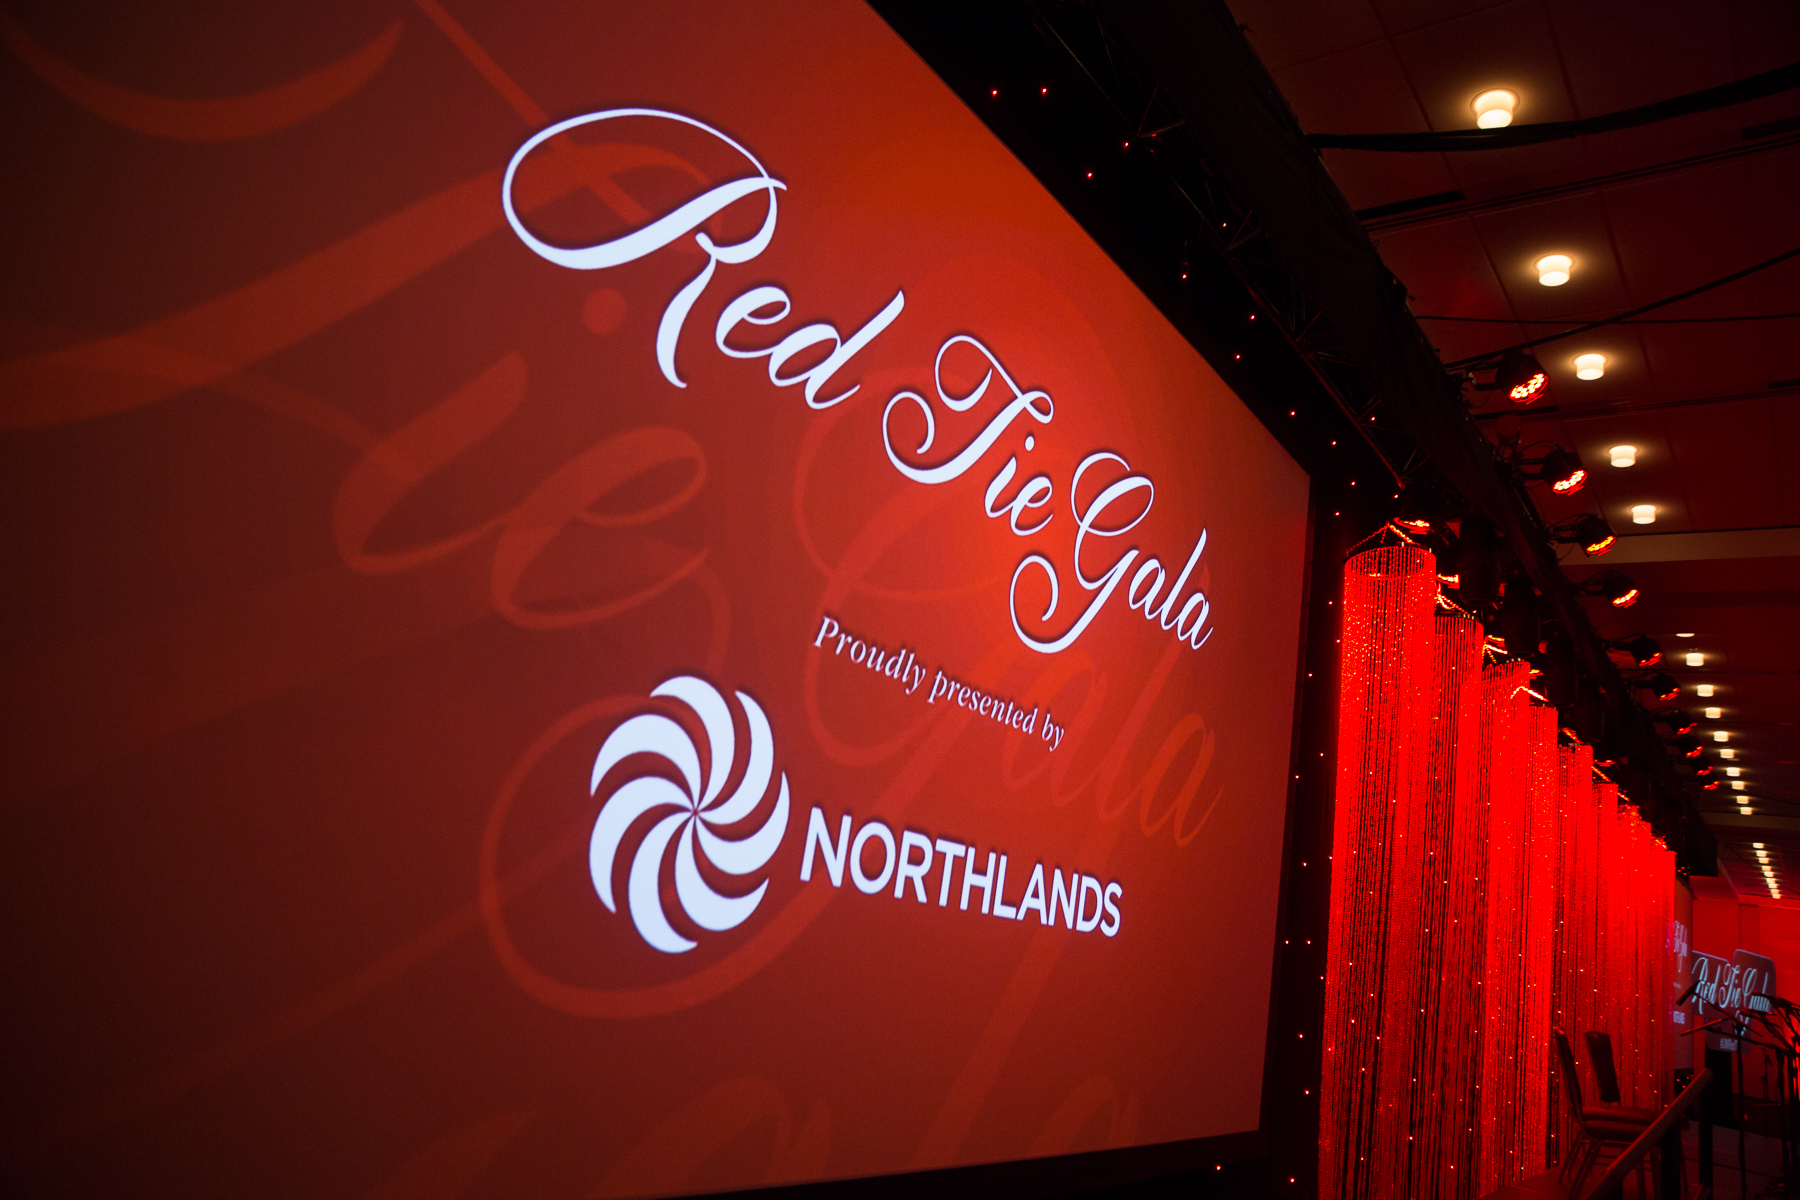 Red Tie Gala 2014